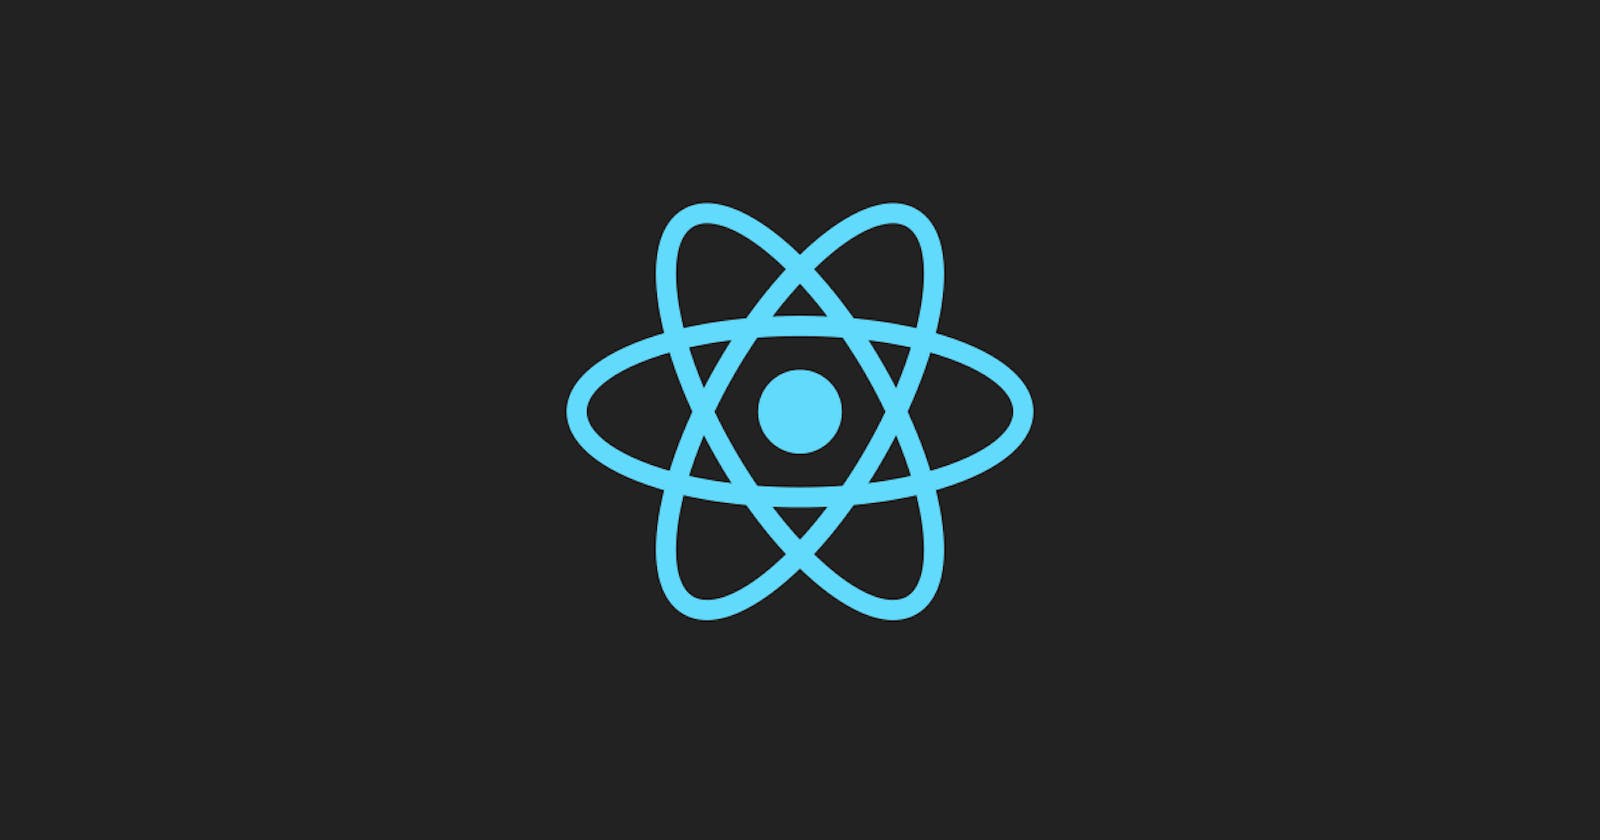 Creating a new project in ReactJS!